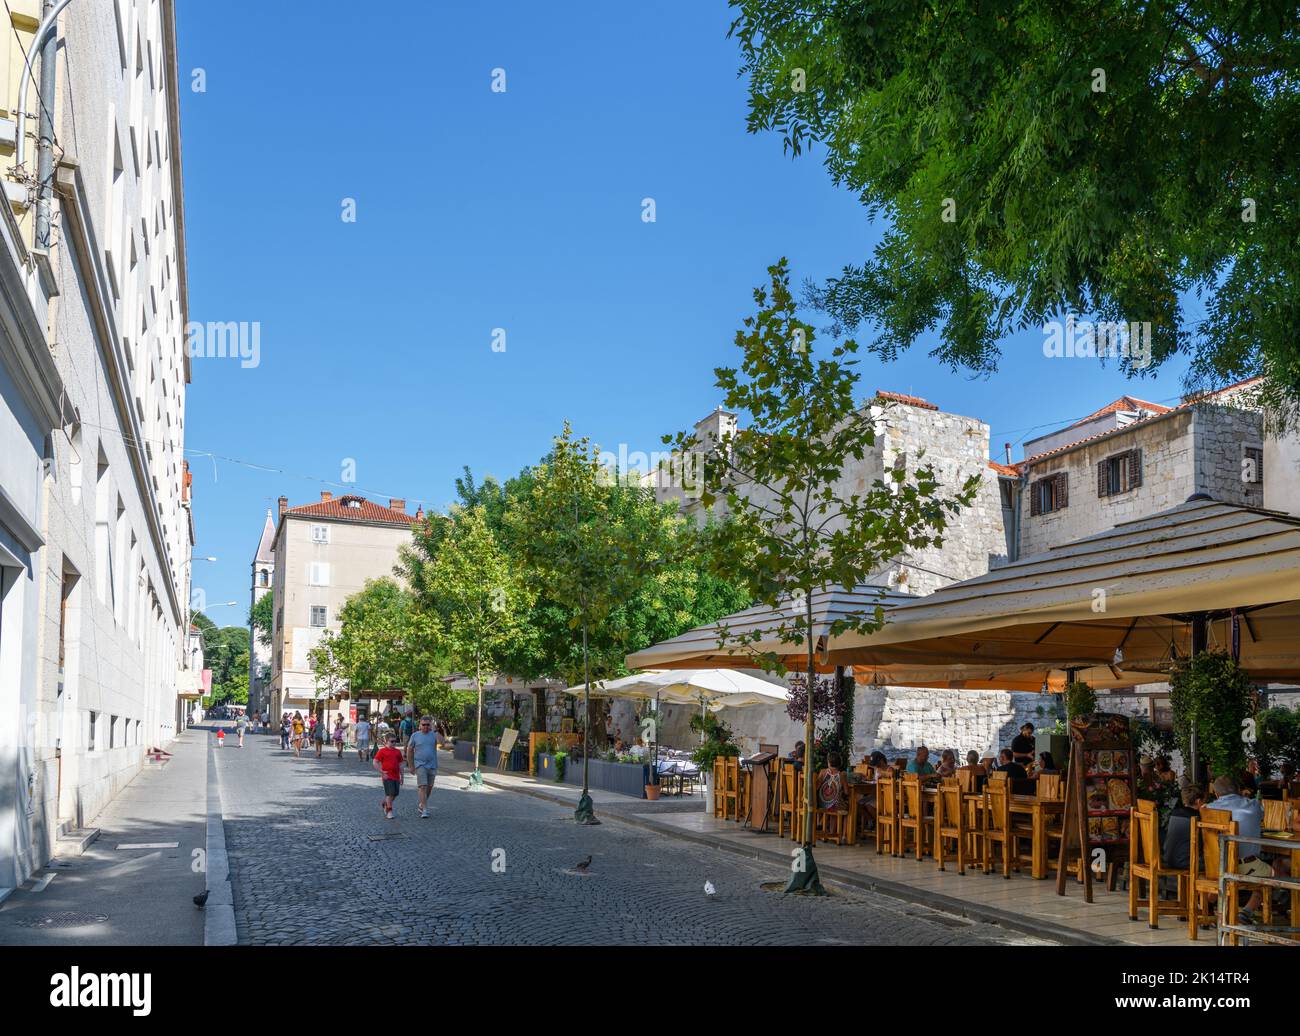 Cafe and bar on Ulica Kralja Tomislava, a street in the old town of Split, Croatia Stock Photo